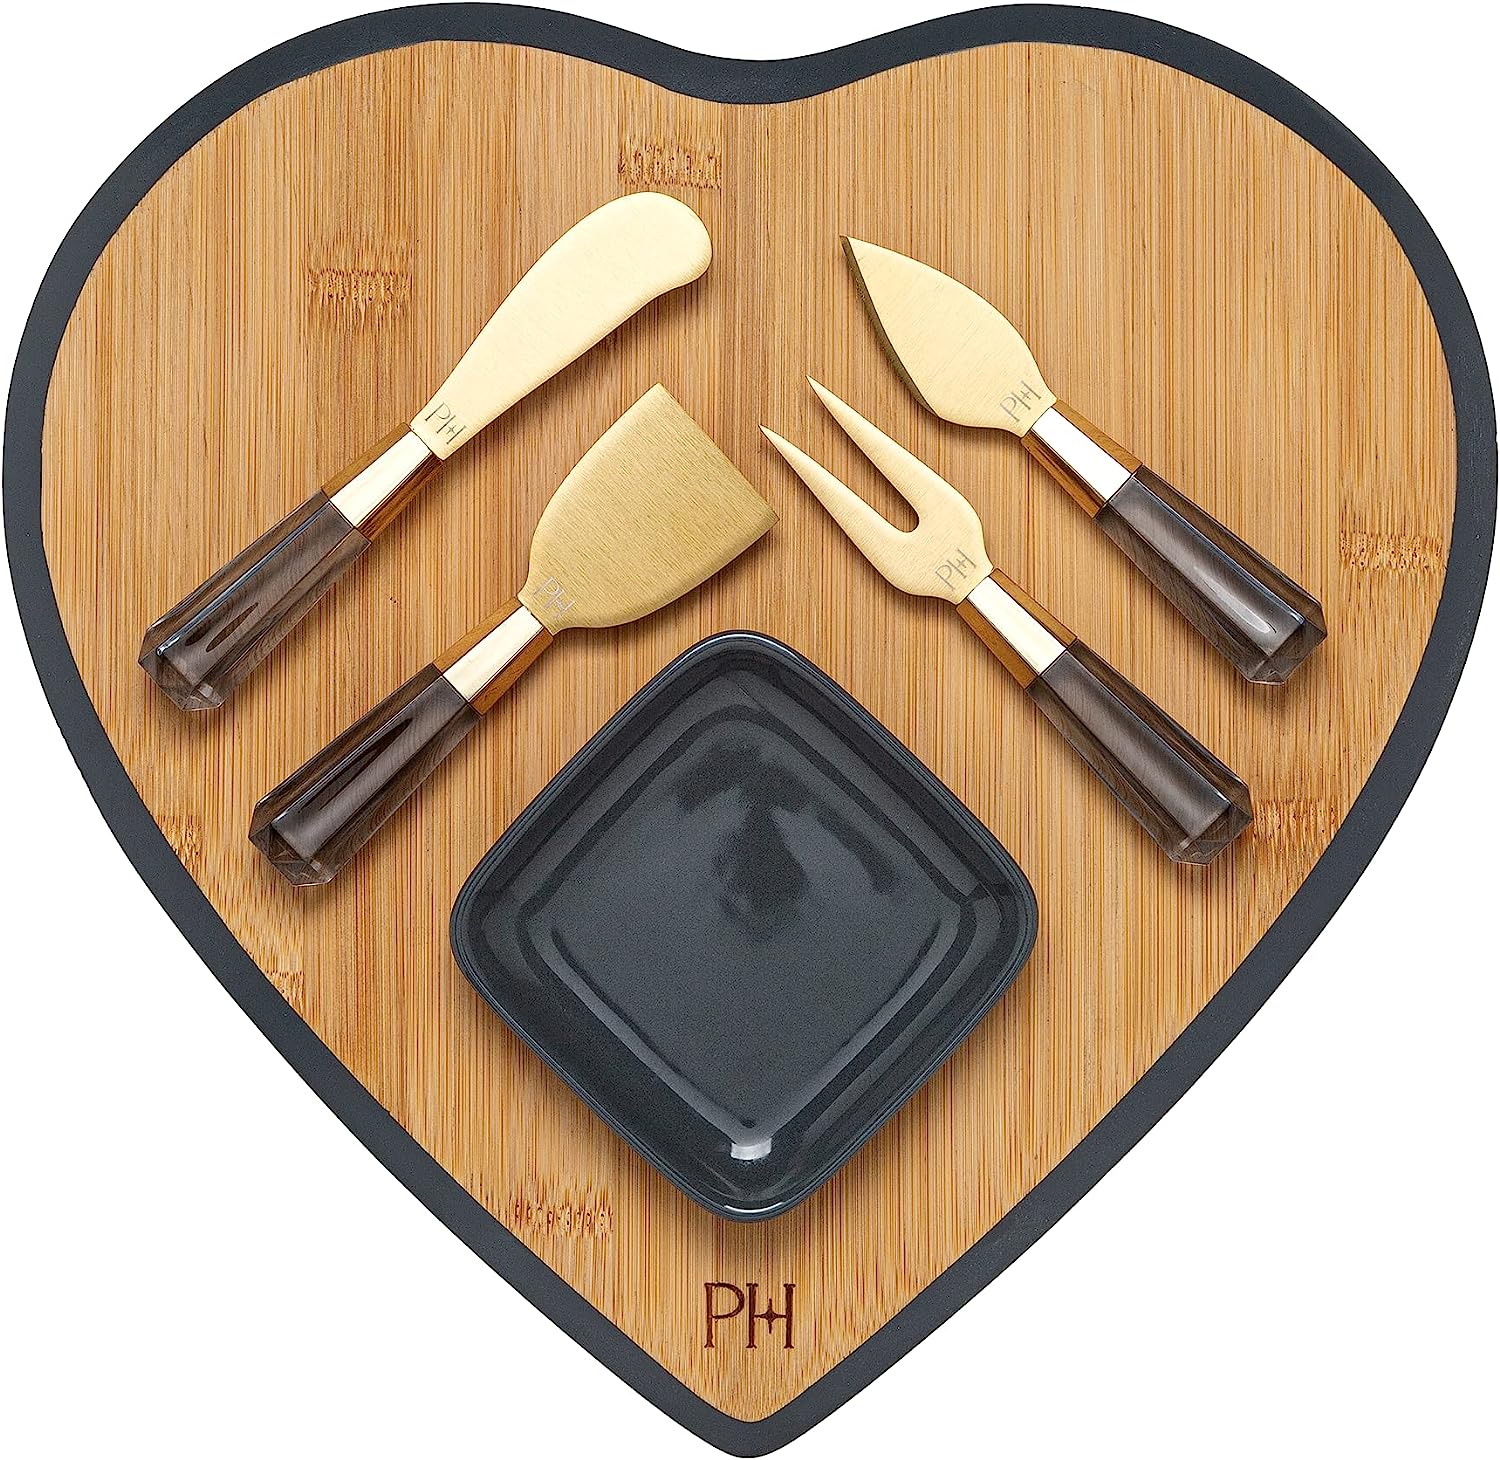 Prime Members: 6-Piece Paris Hilton Bamboo Charcuterie Board & Serving Set $11.11 & More + Free Shipping